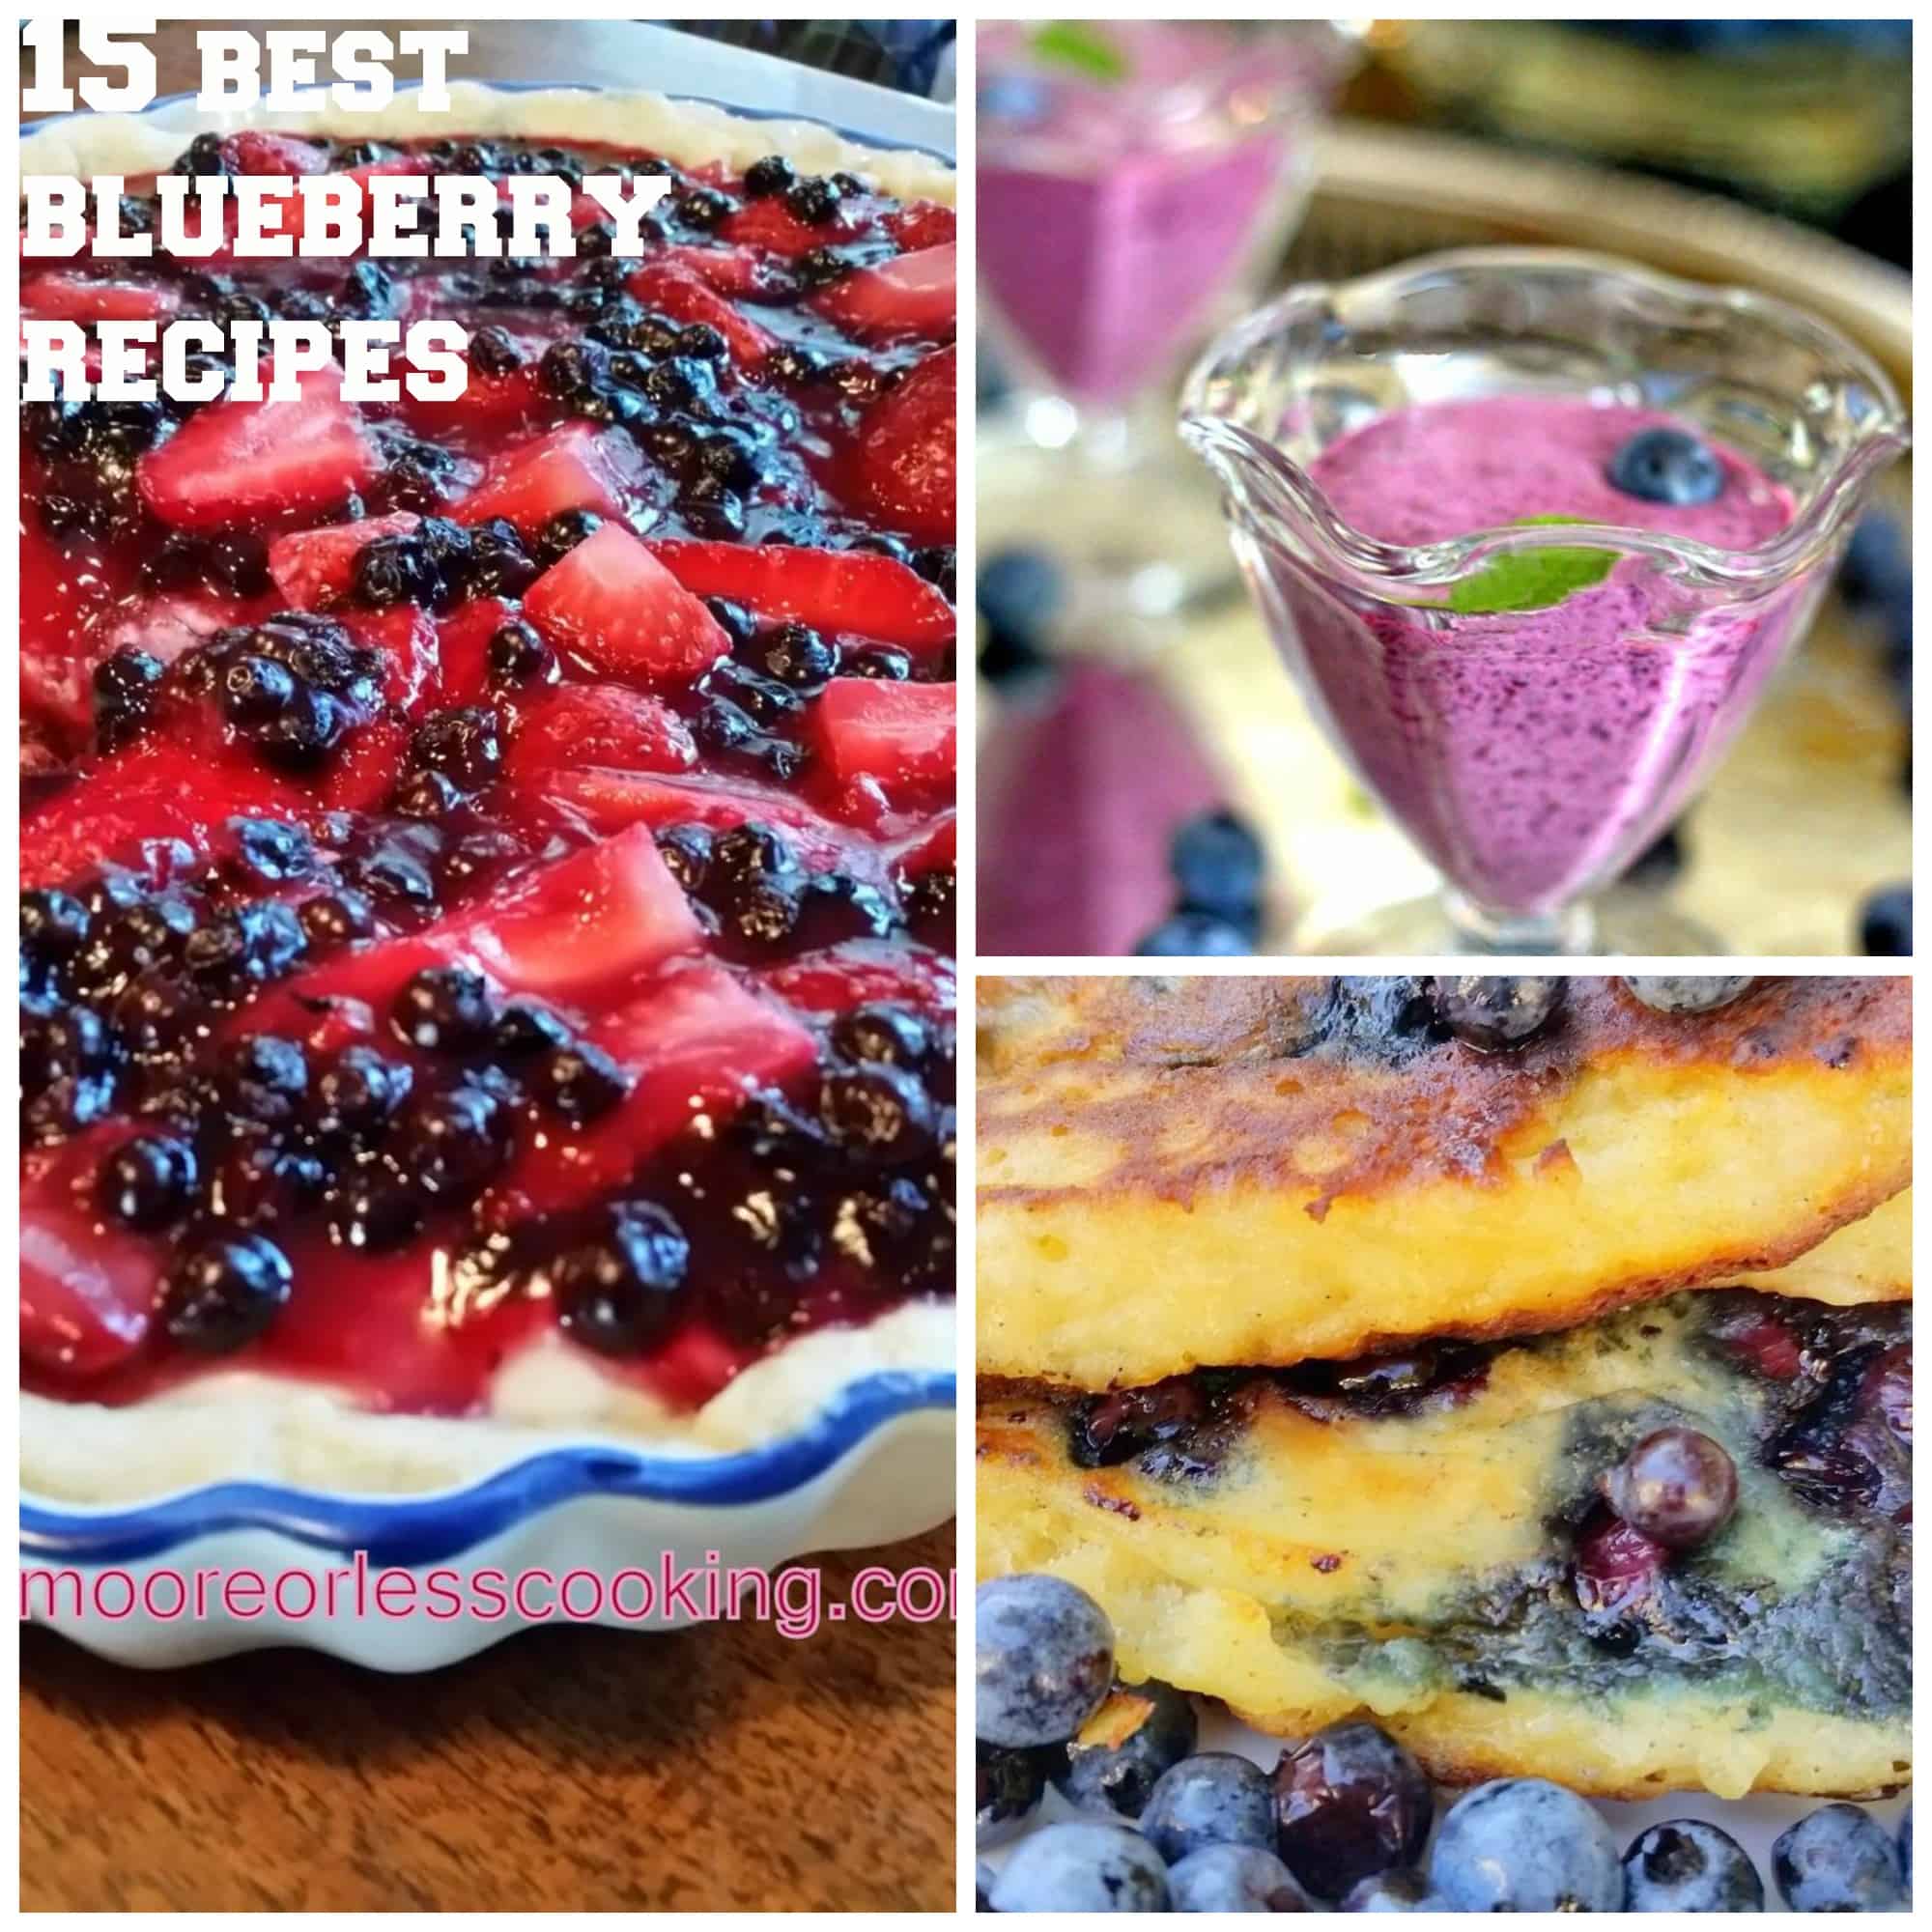 15 Very Best Ways to Welcome Blueberries! 